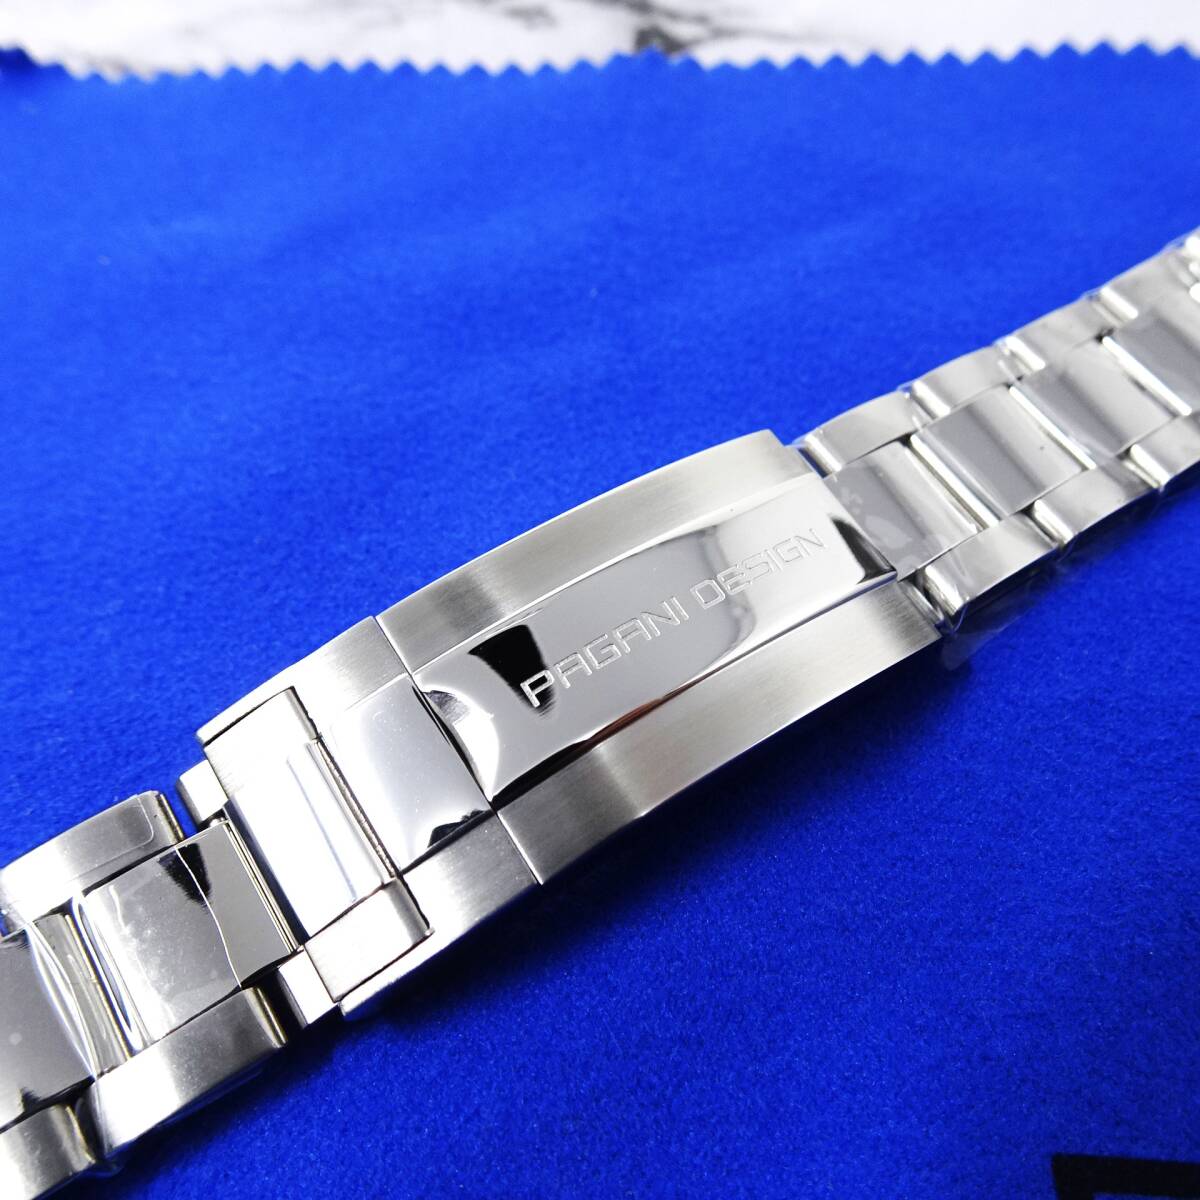  free shipping * new goods *315L made of stainless steel * Pagani design * three ream type standard * bow . attaching clock belt width 20mm correspondence compatibility . wristwatch change * band 